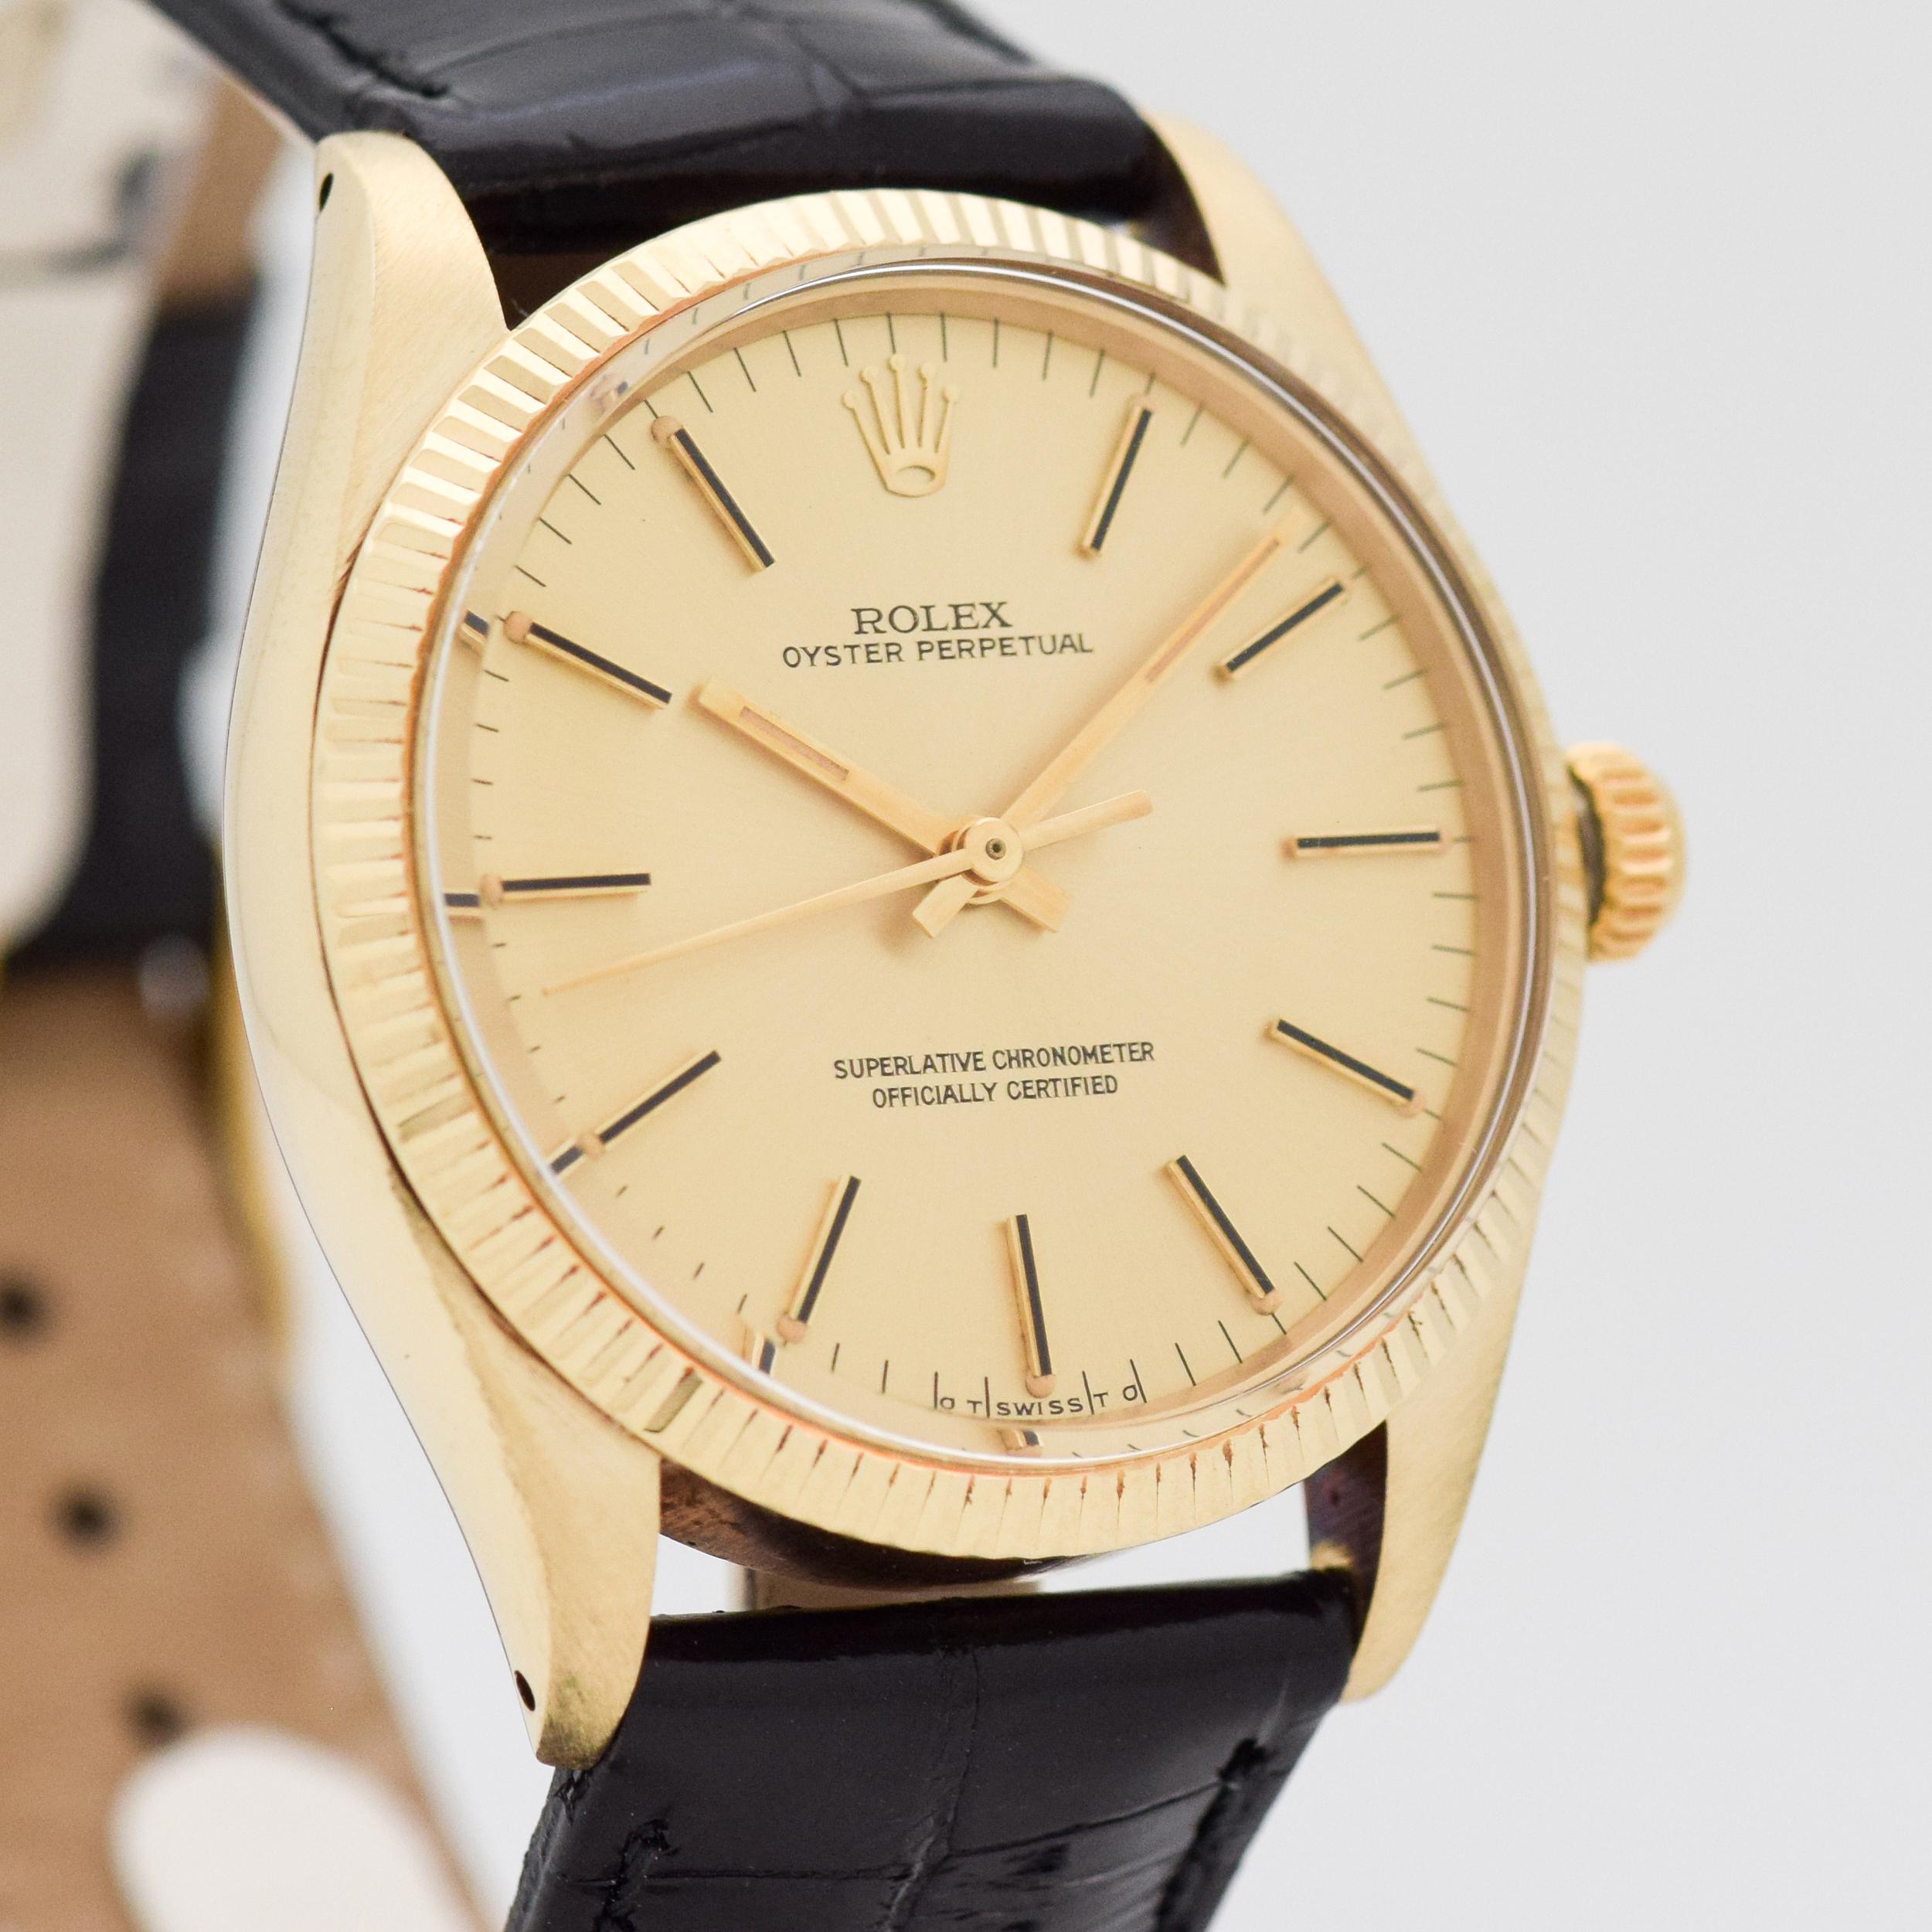 A 1976 Vintage Rolex Oyster Perpetual Reference 1005. 18K Yellow Gold Watch case. 34mm wide. Original, champagne dial. Equipped with a 26-jewel, automatic caliber movement. Comes on a Glossy, Black-colored Genuine Alligator watch strap. Swiss-made.